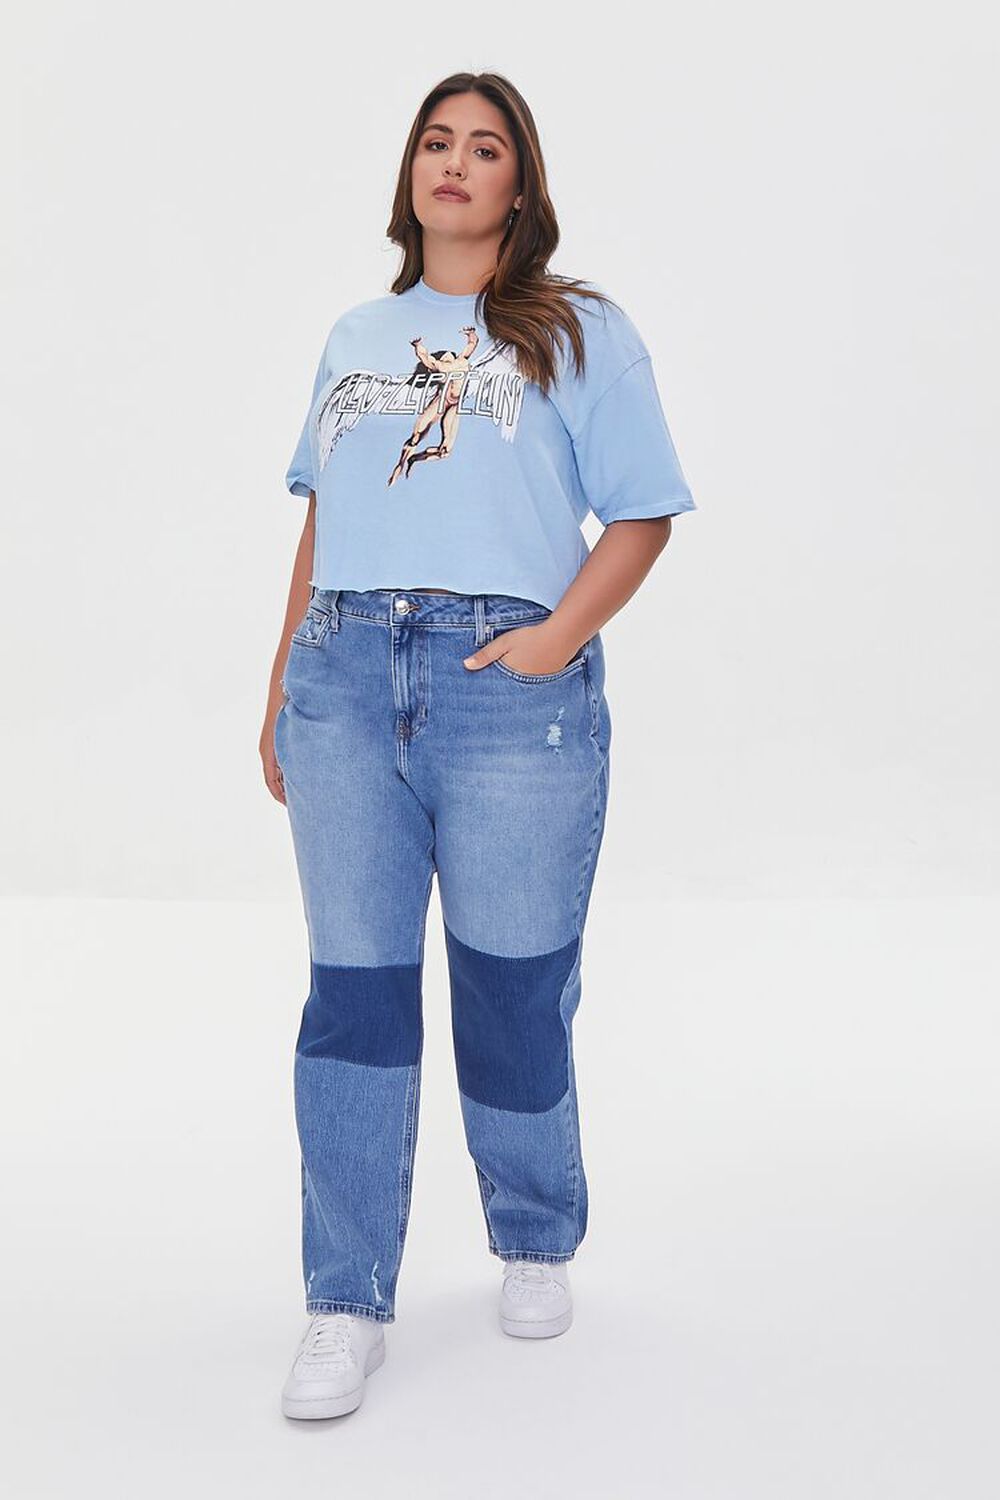 Plus Size Led Zeppelin Cropped Tee